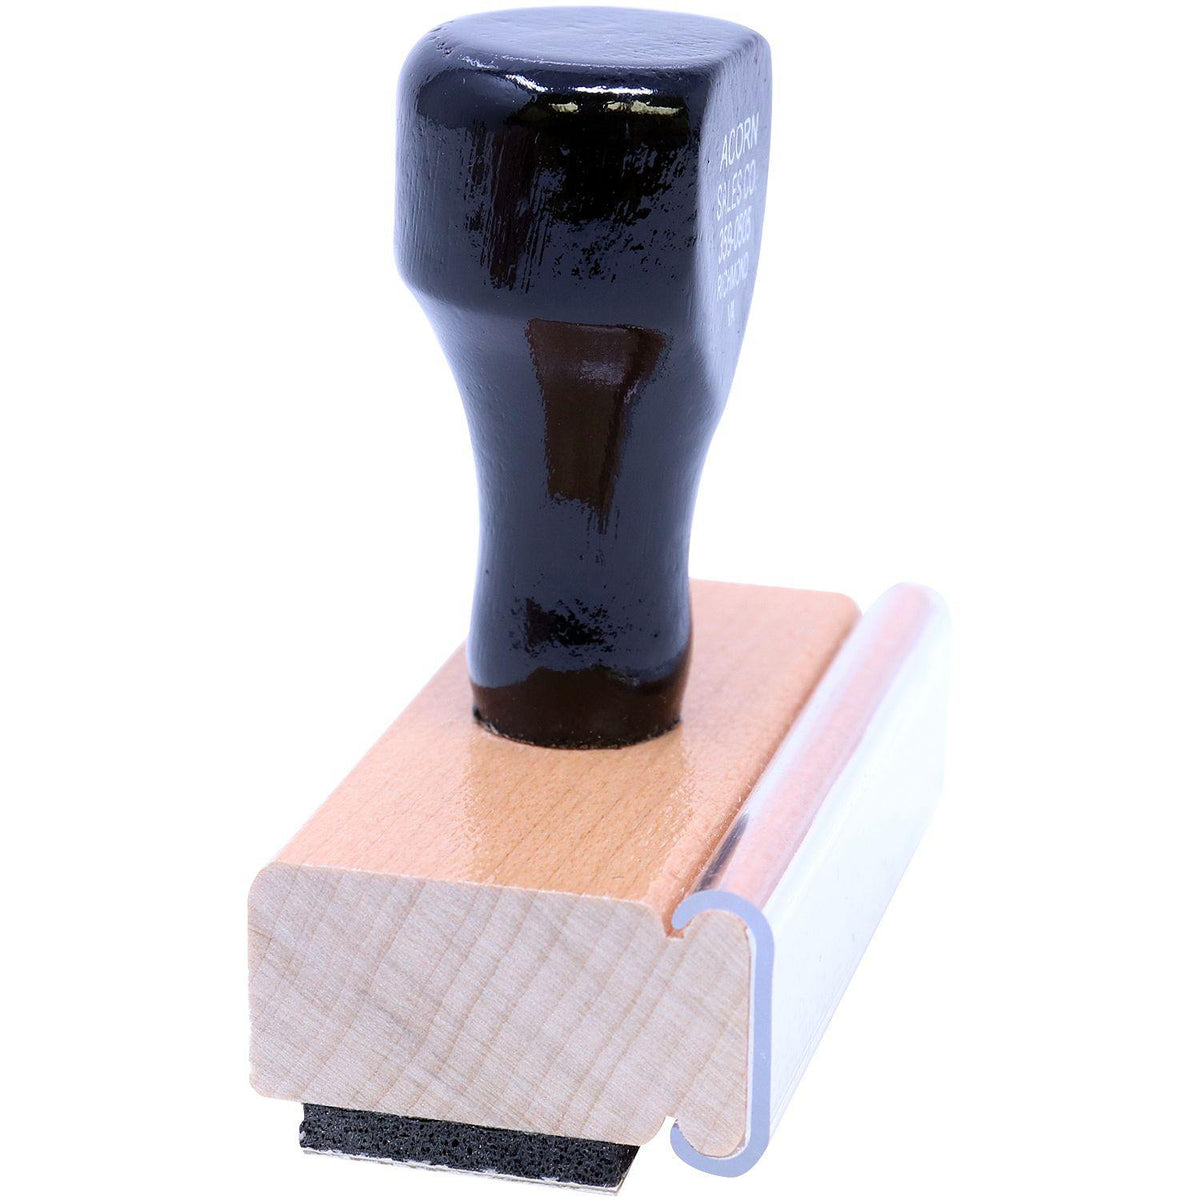 Side View of Large Copy Rubber Stamp at an Angle